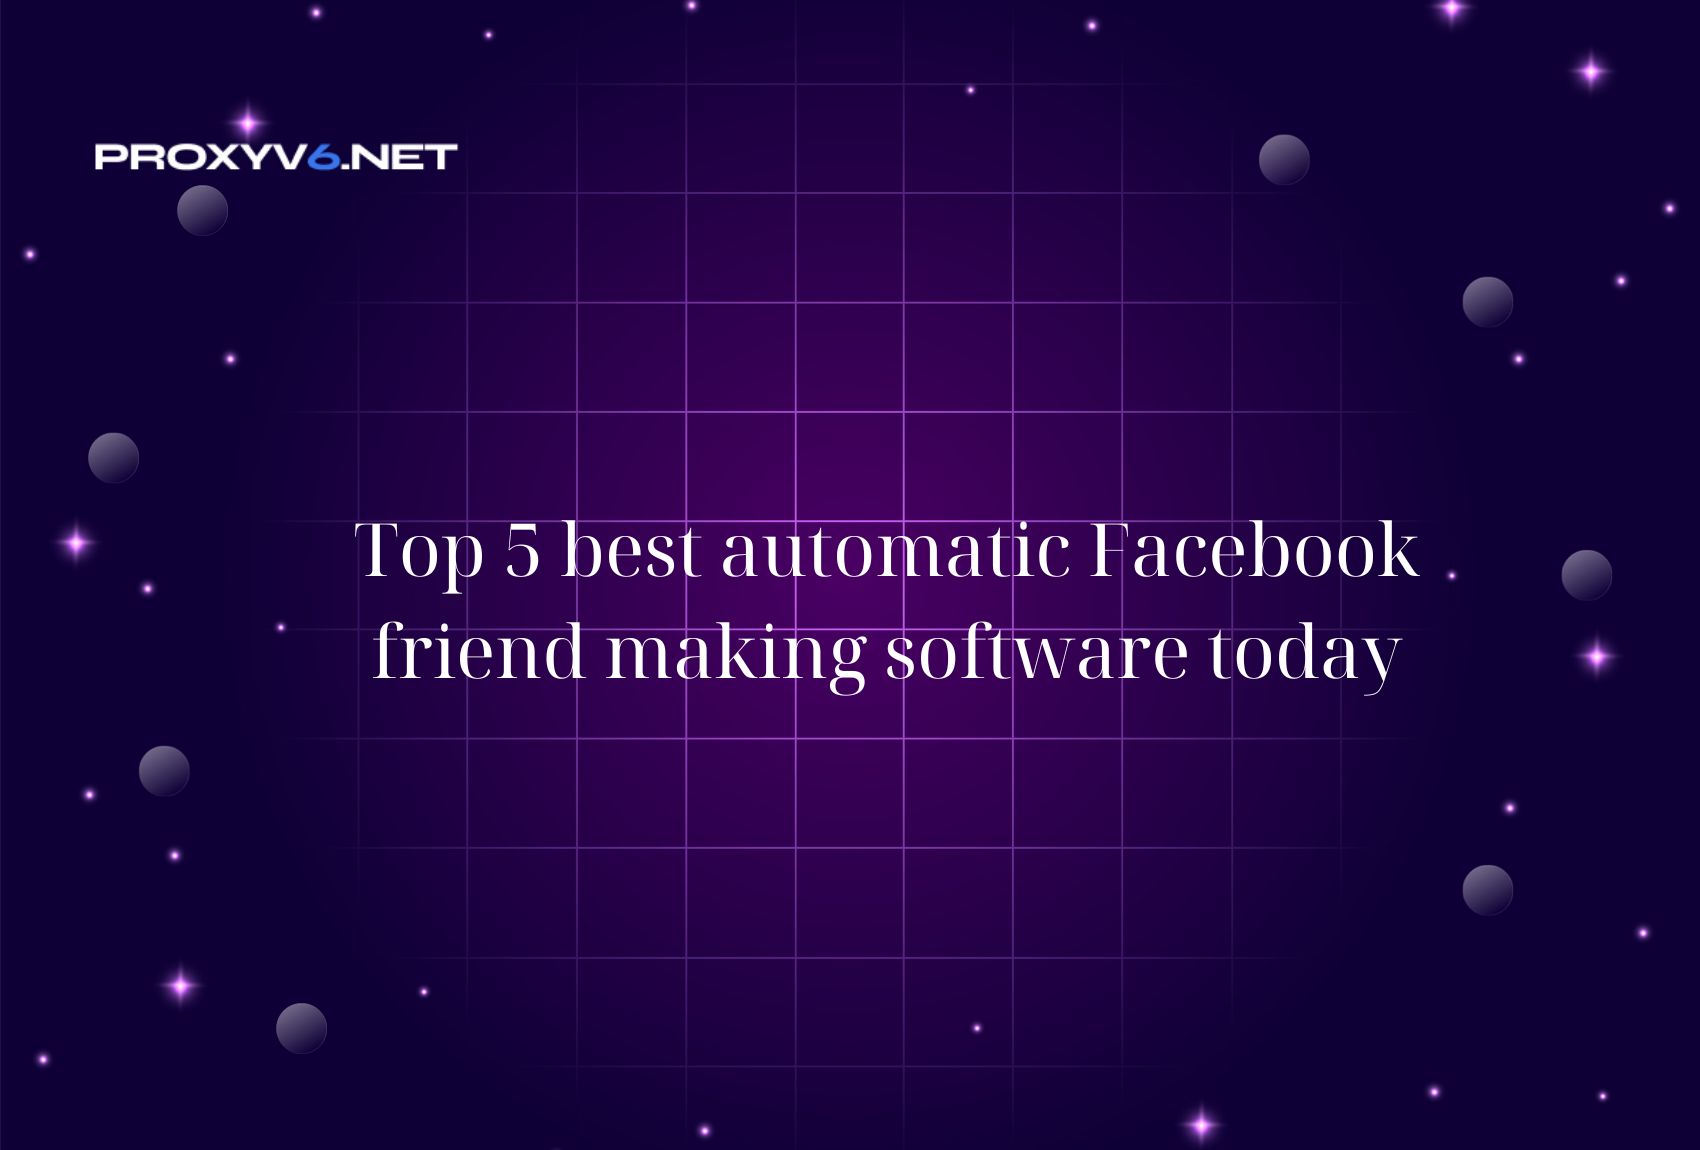 Top 5 best automatic Facebook friend making software today